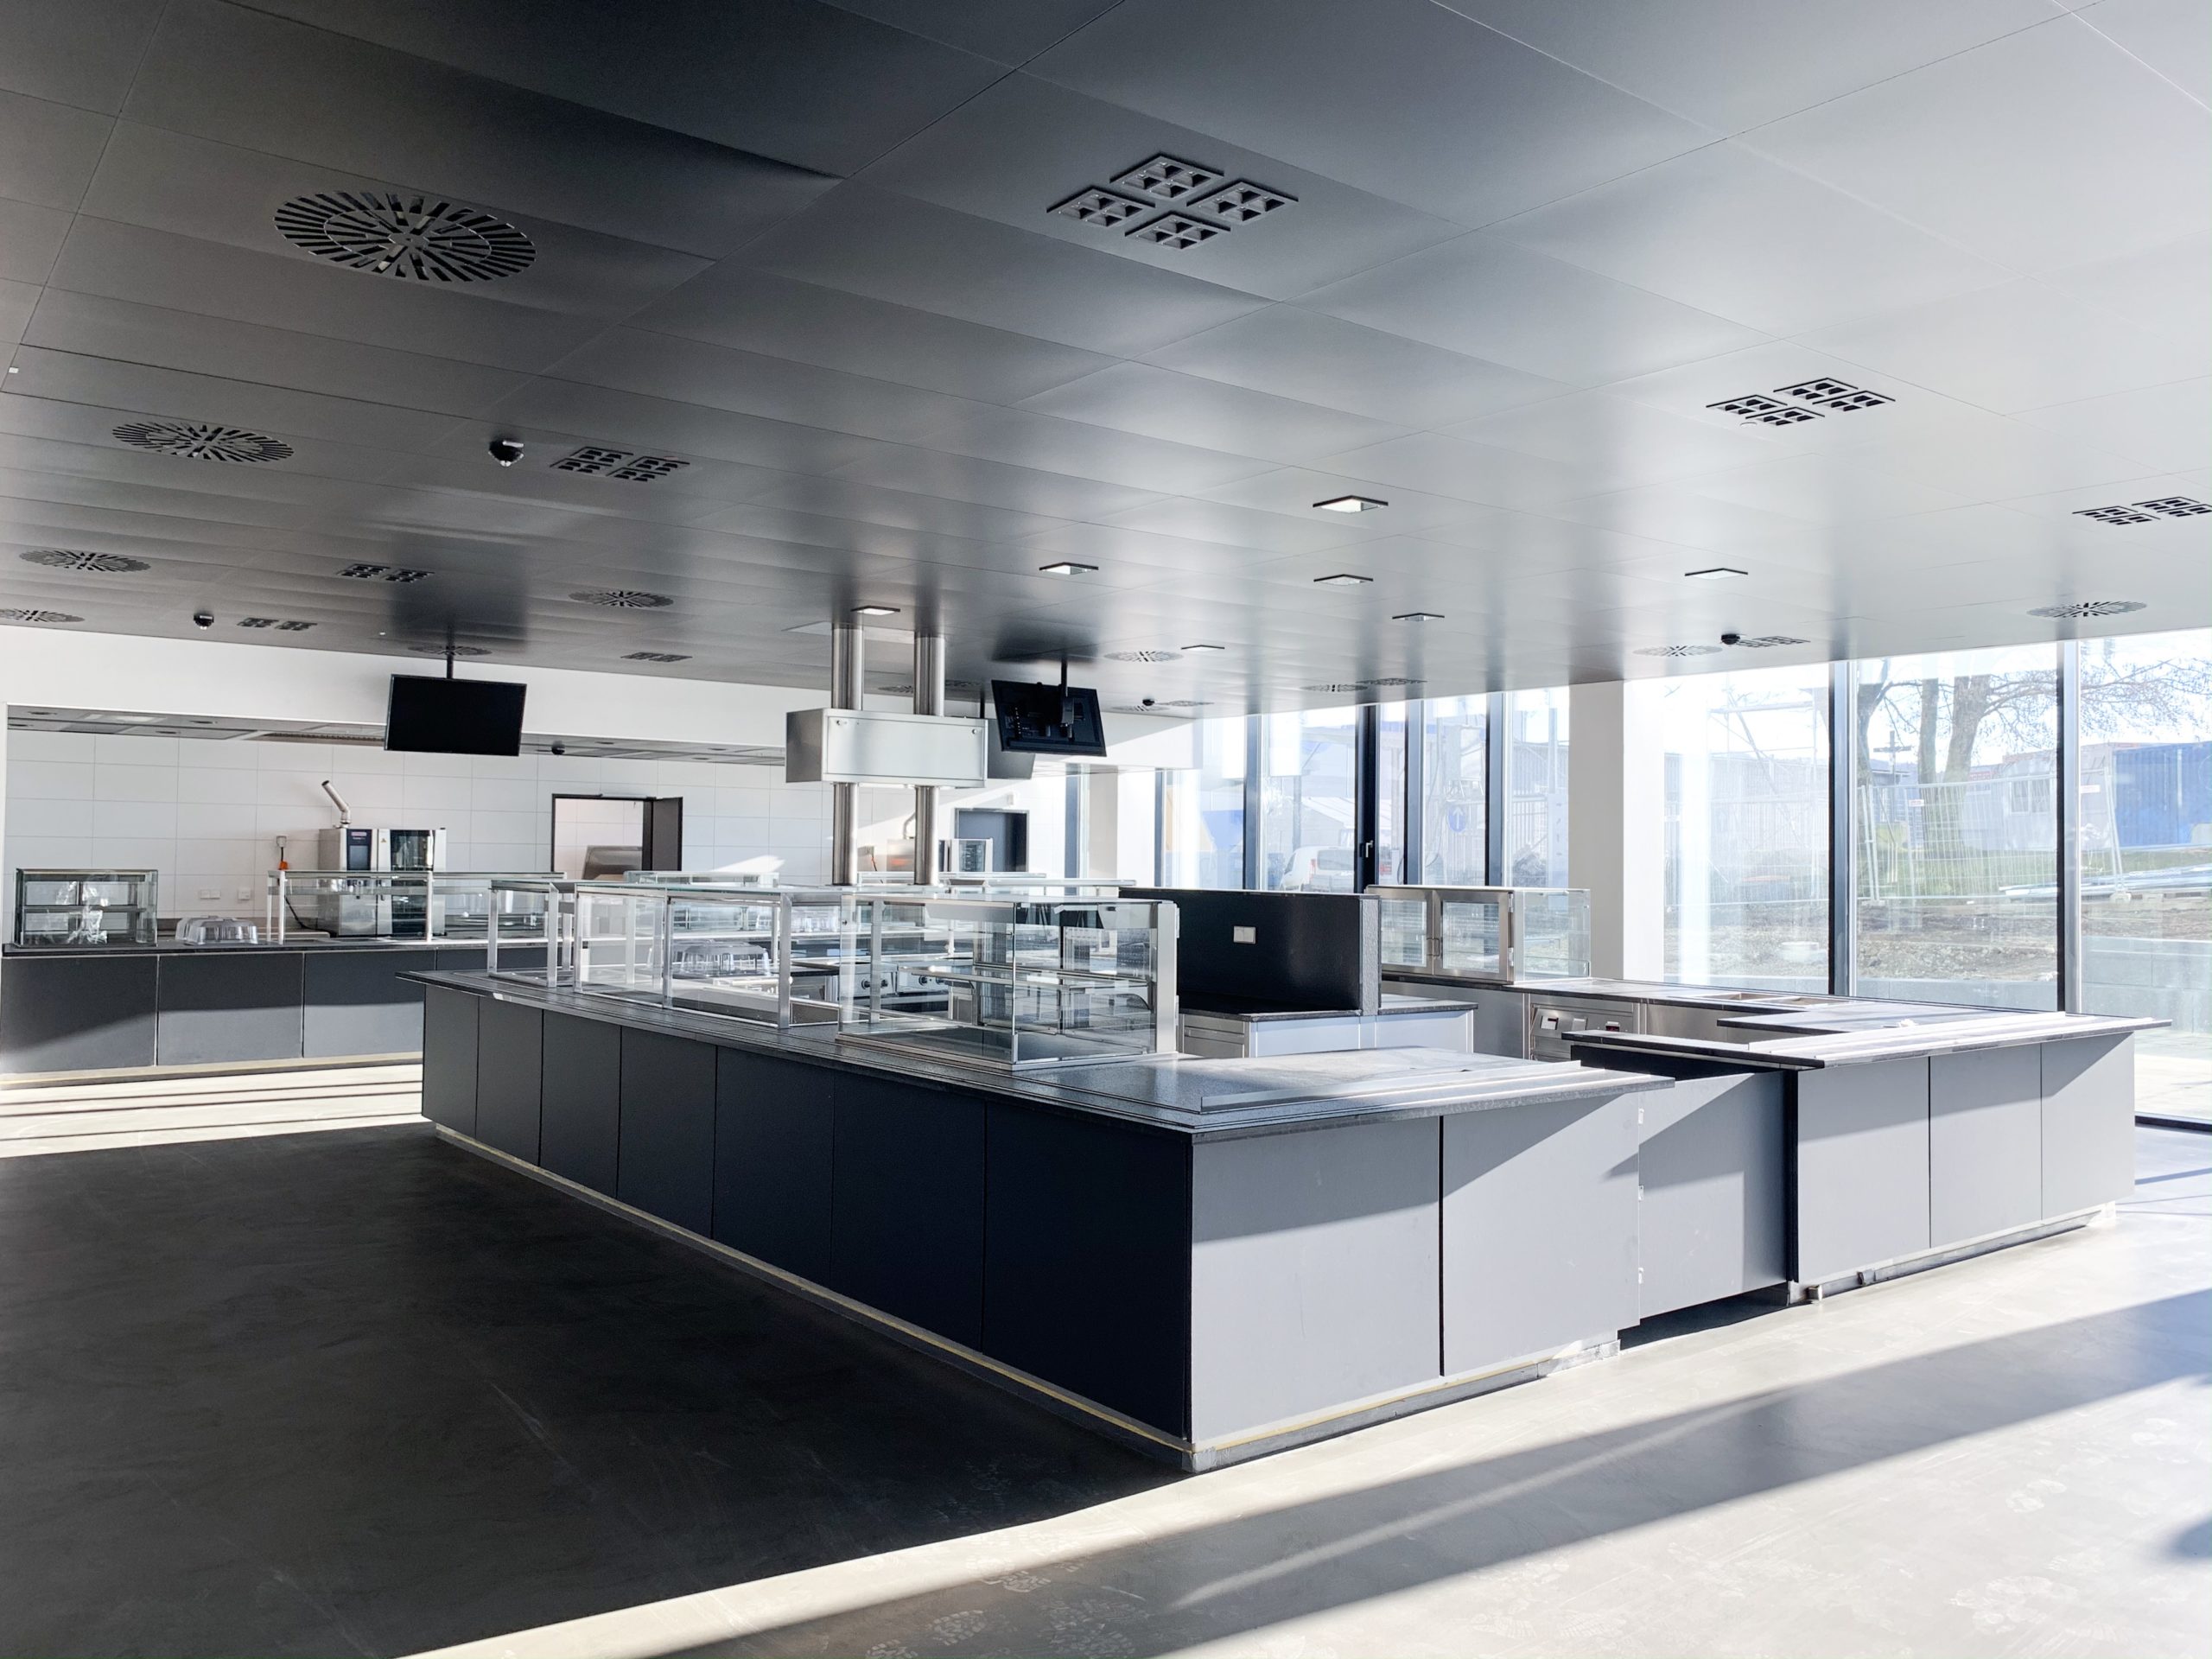 Building services kitchen/canteen Multivac